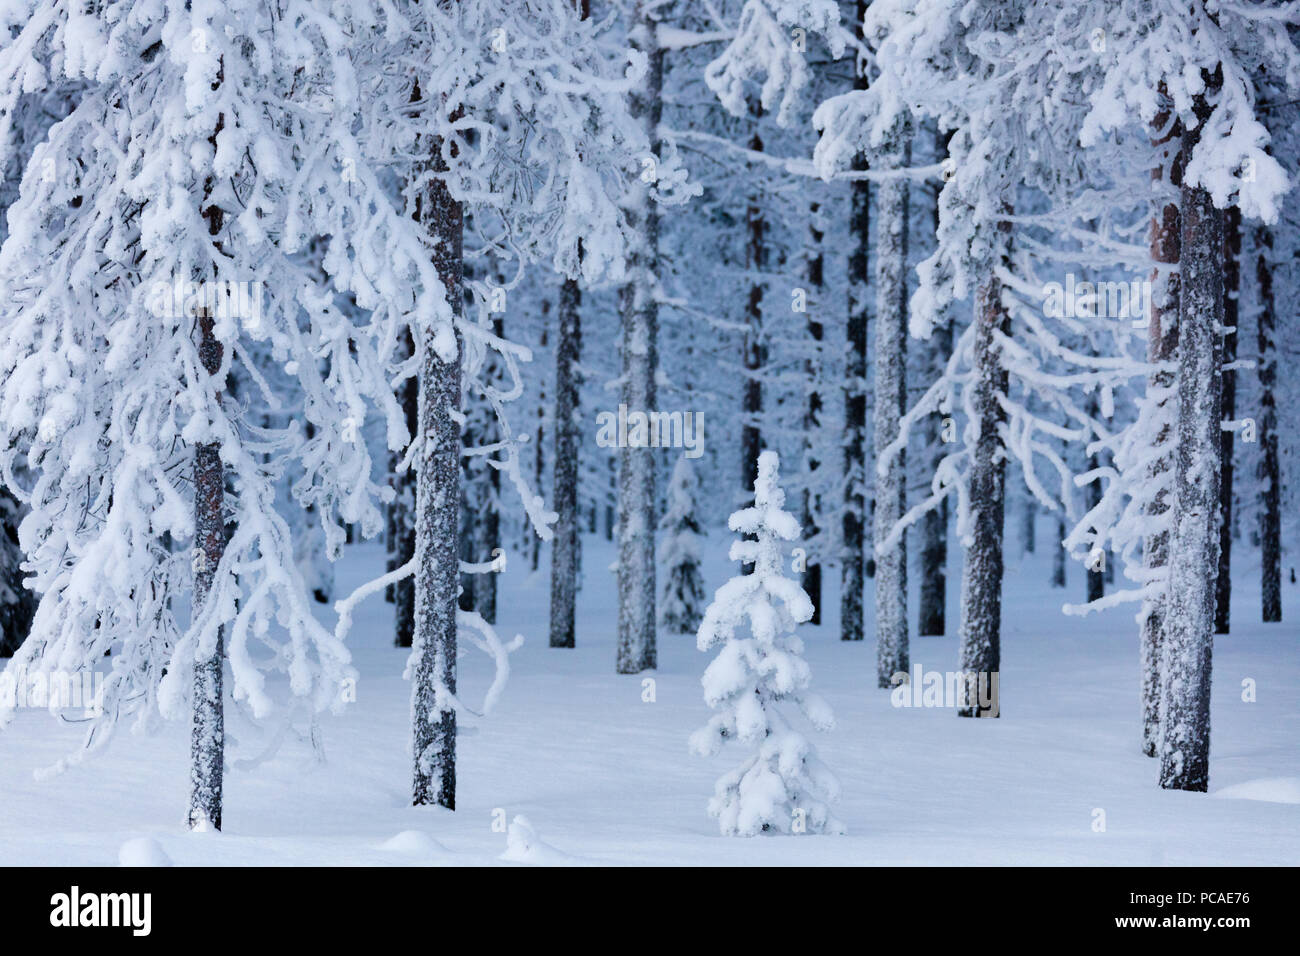 Frozen trees in the snow capped forest, Sodankyla, Lapland, Finland, Europe Stock Photo